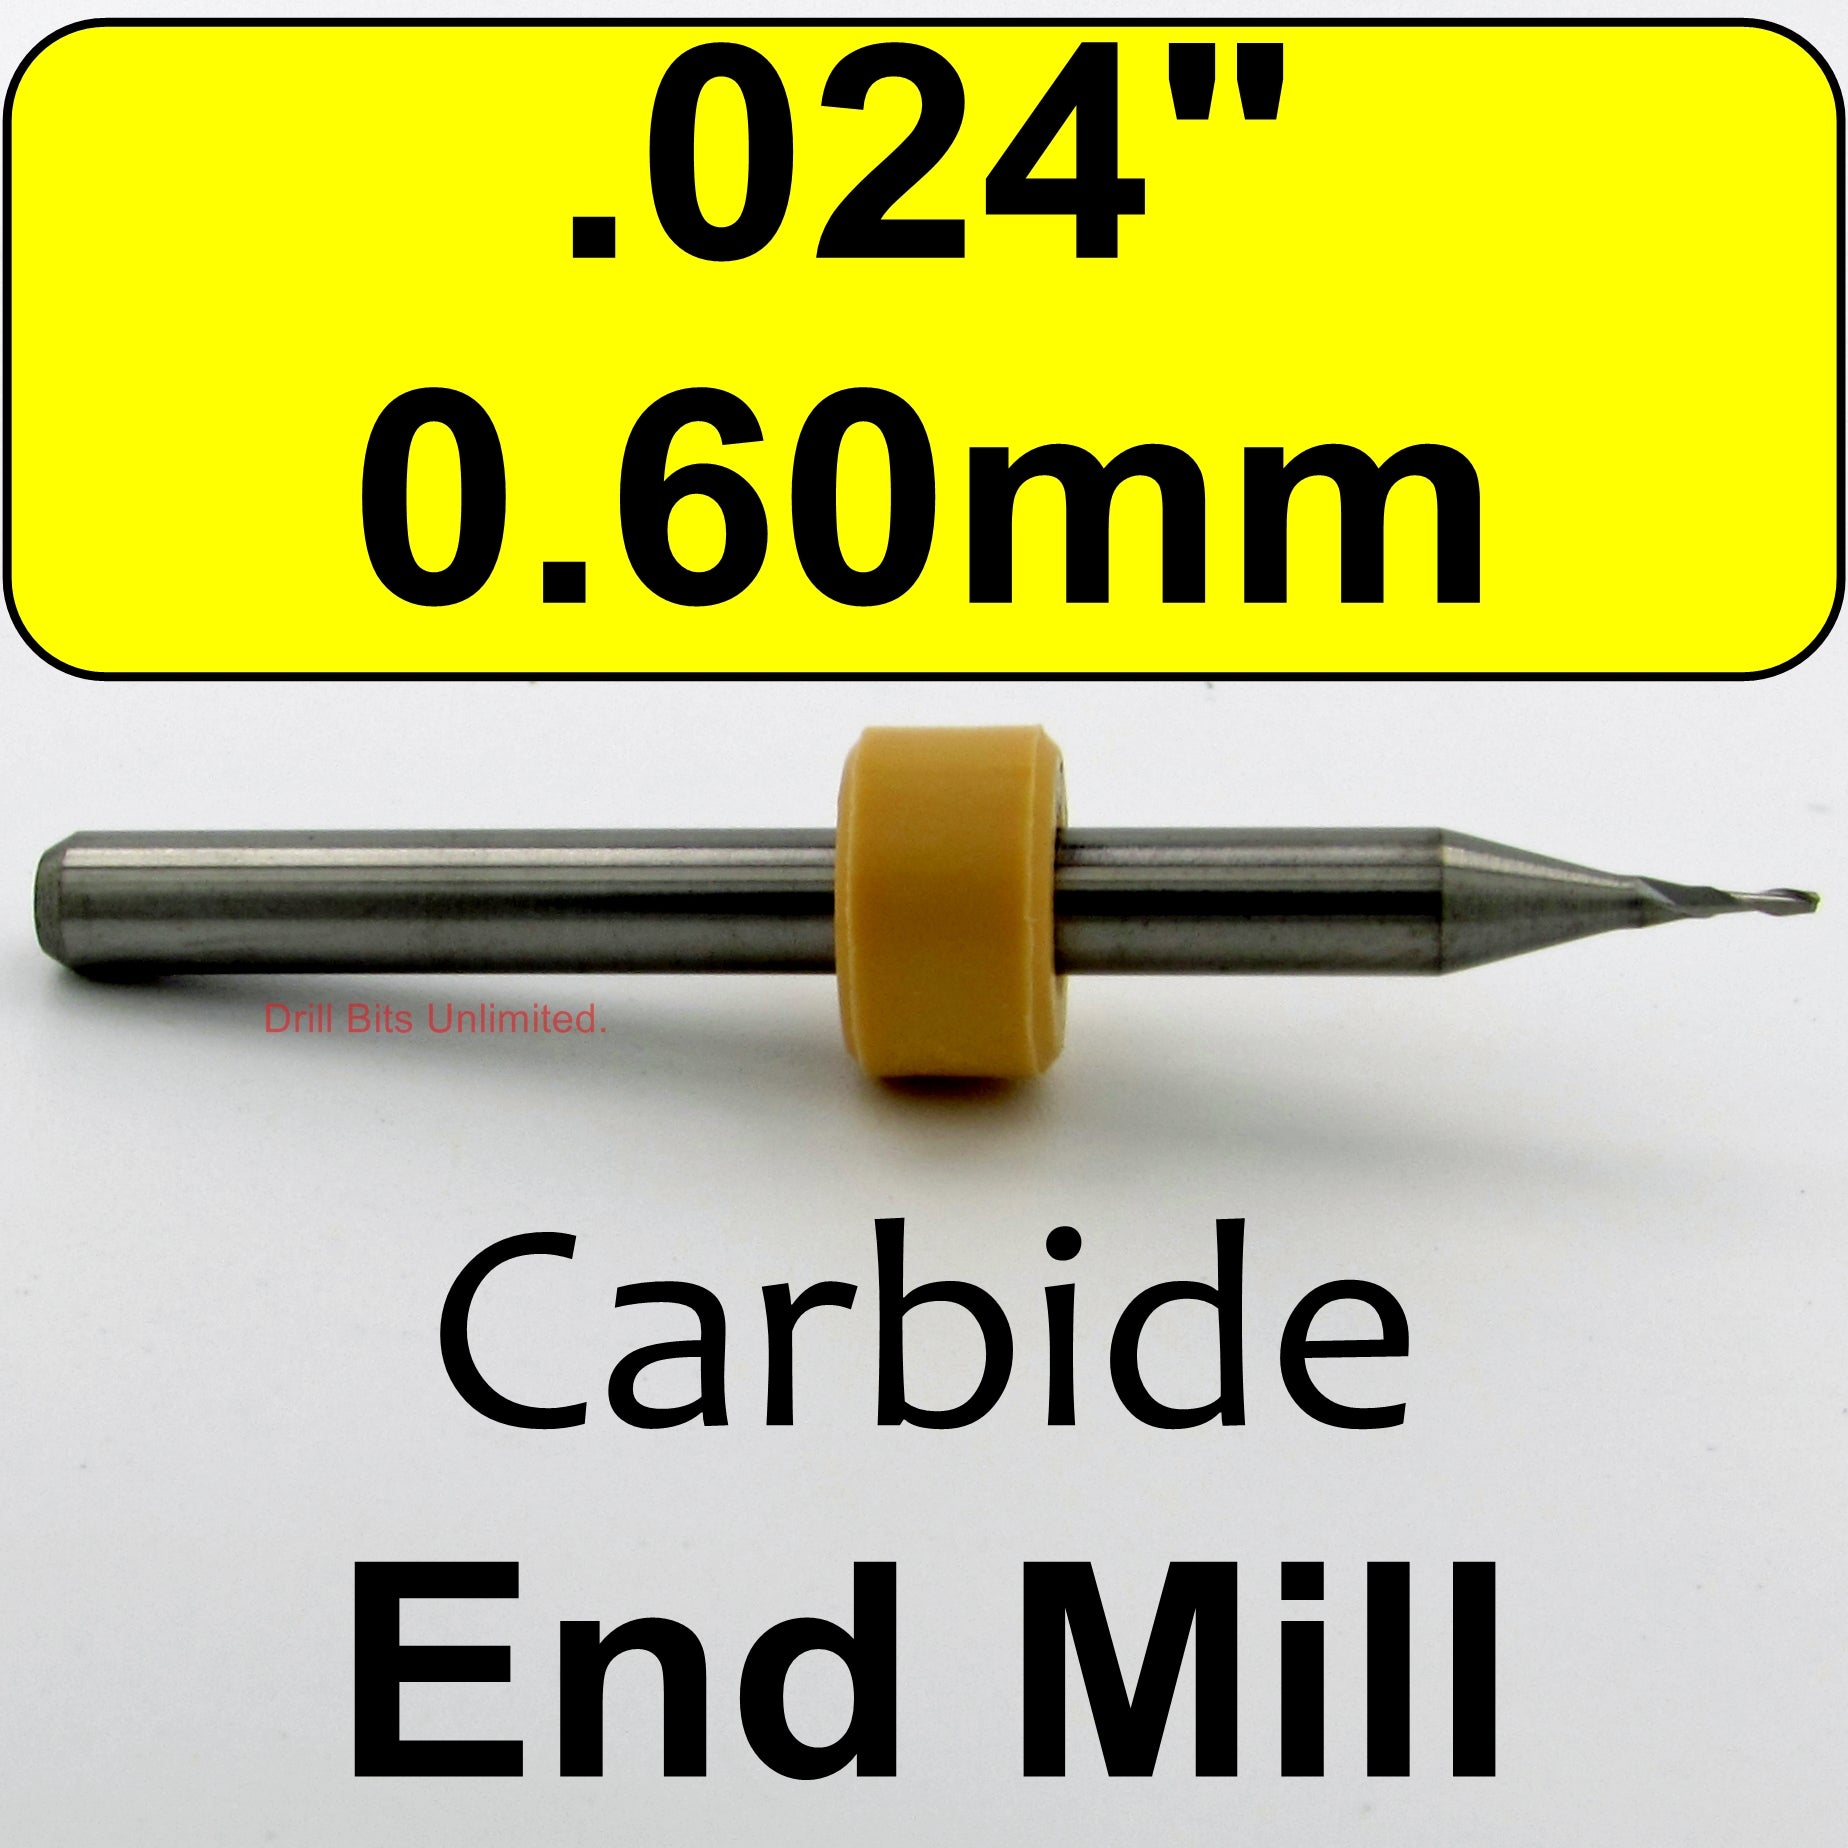  .024" (0.60mm) Two Flute Carbide End Mill - Up Cut